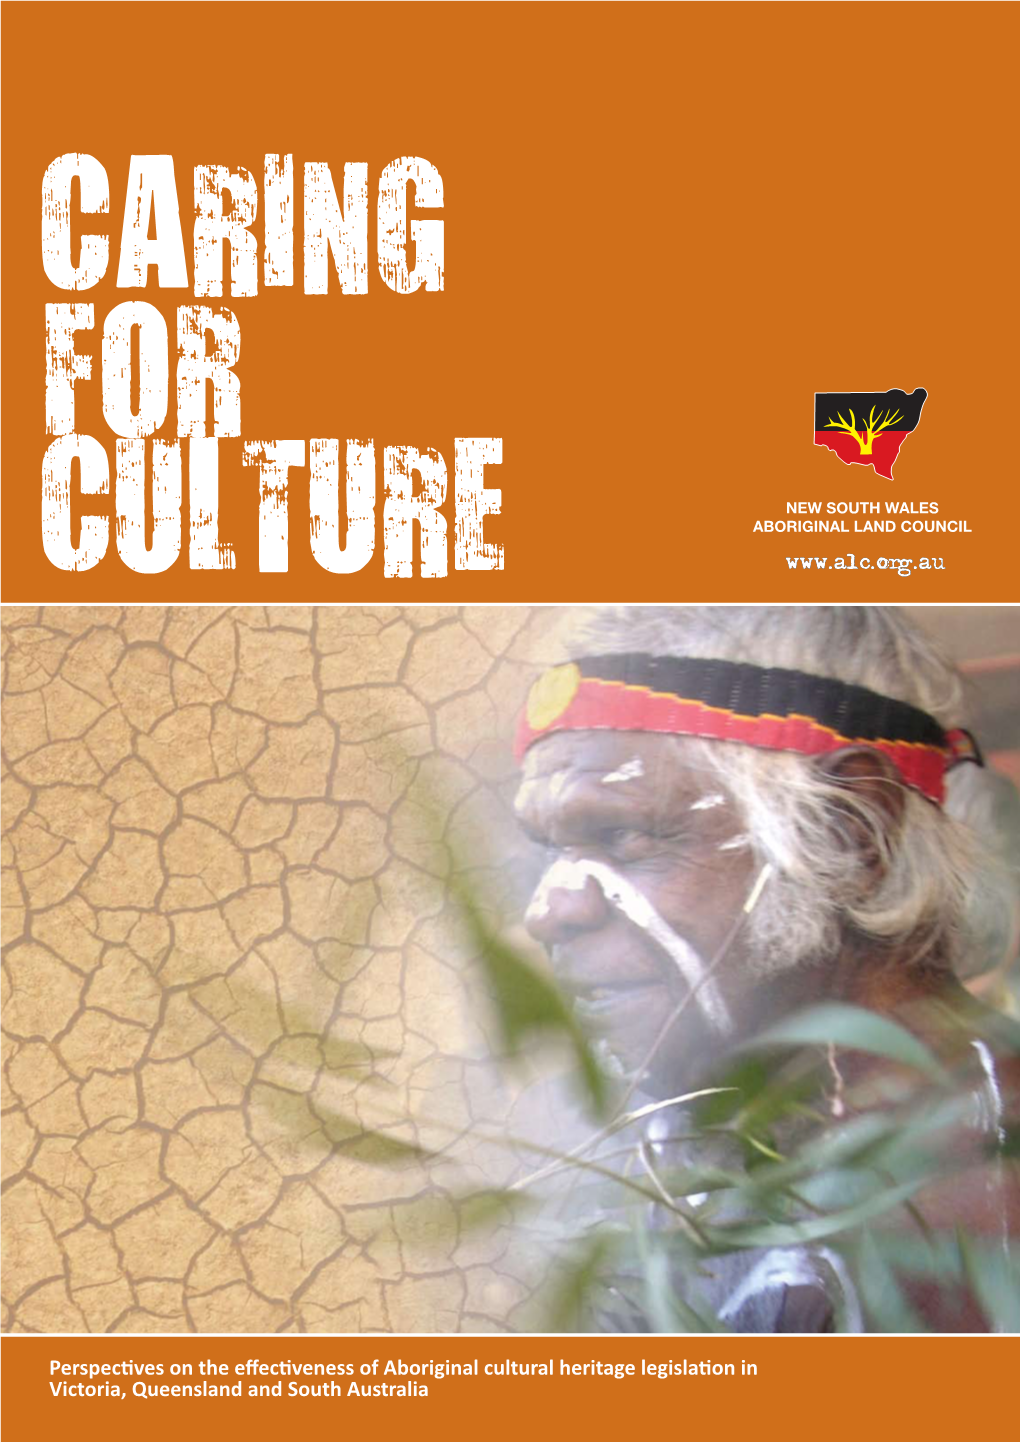 Care. the Cultural Heritage Duty Care Is a Well Understood Legal Concept and Fits Well with Aboriginal Notions of Having a Responsibility for Culture